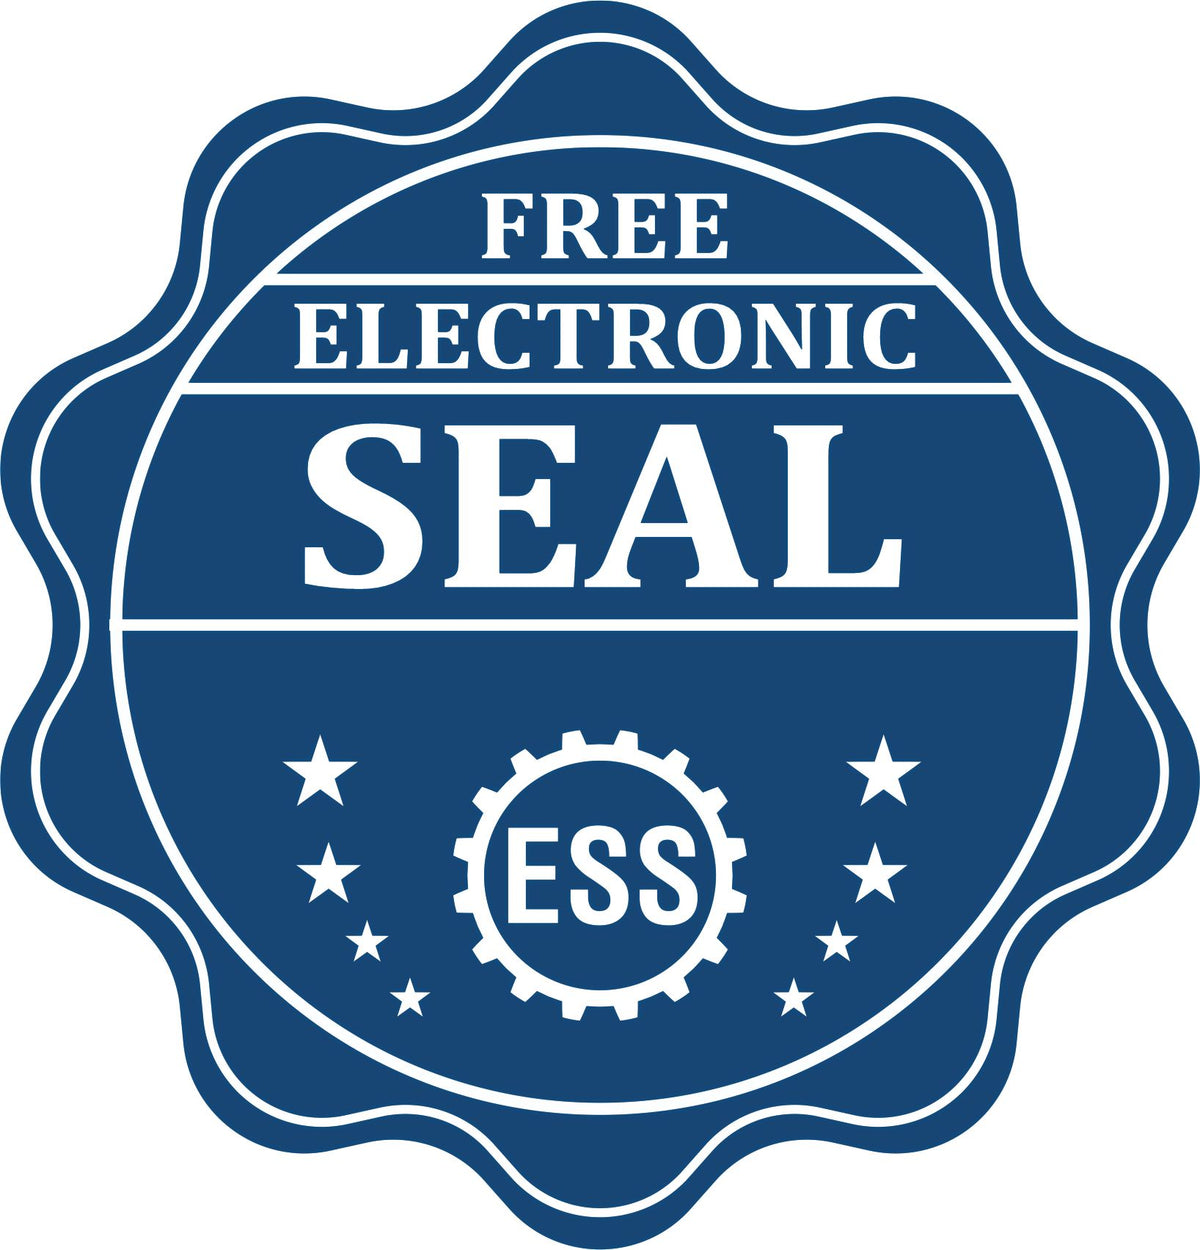 A badge showing a free electronic seal for the Heavy Duty Cast Iron South Carolina Geologist Seal Embosser with stars and the ESS gear on the emblem.